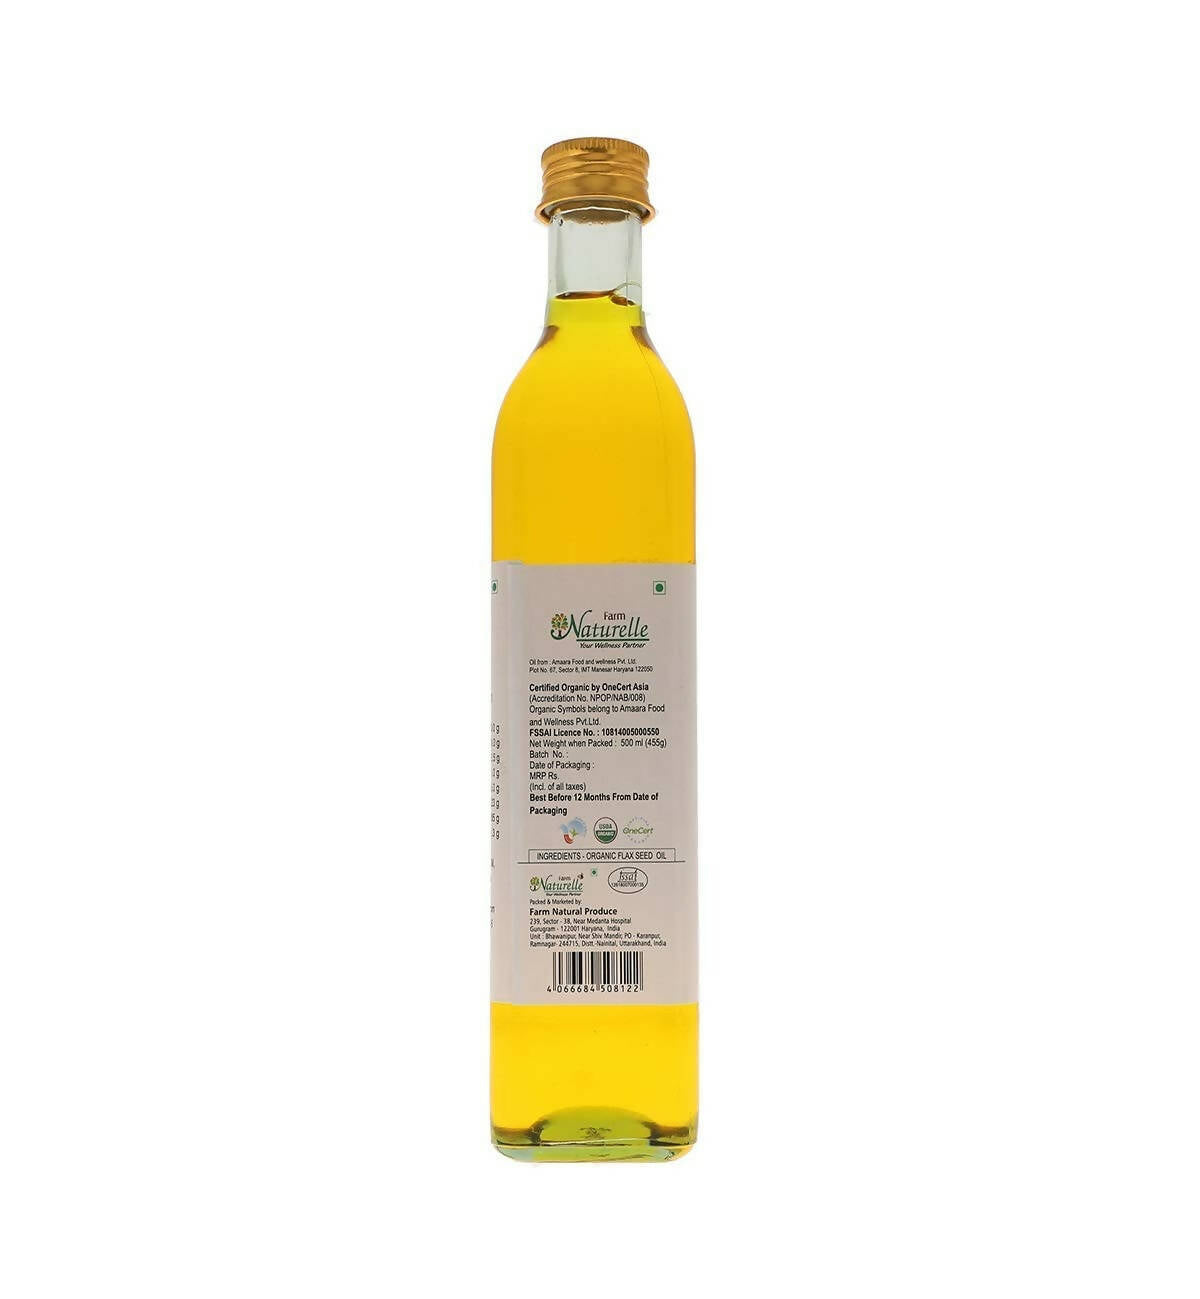 Farm Naturelle 100% Pure Cold Pressed Flax Seed Oil - Distacart